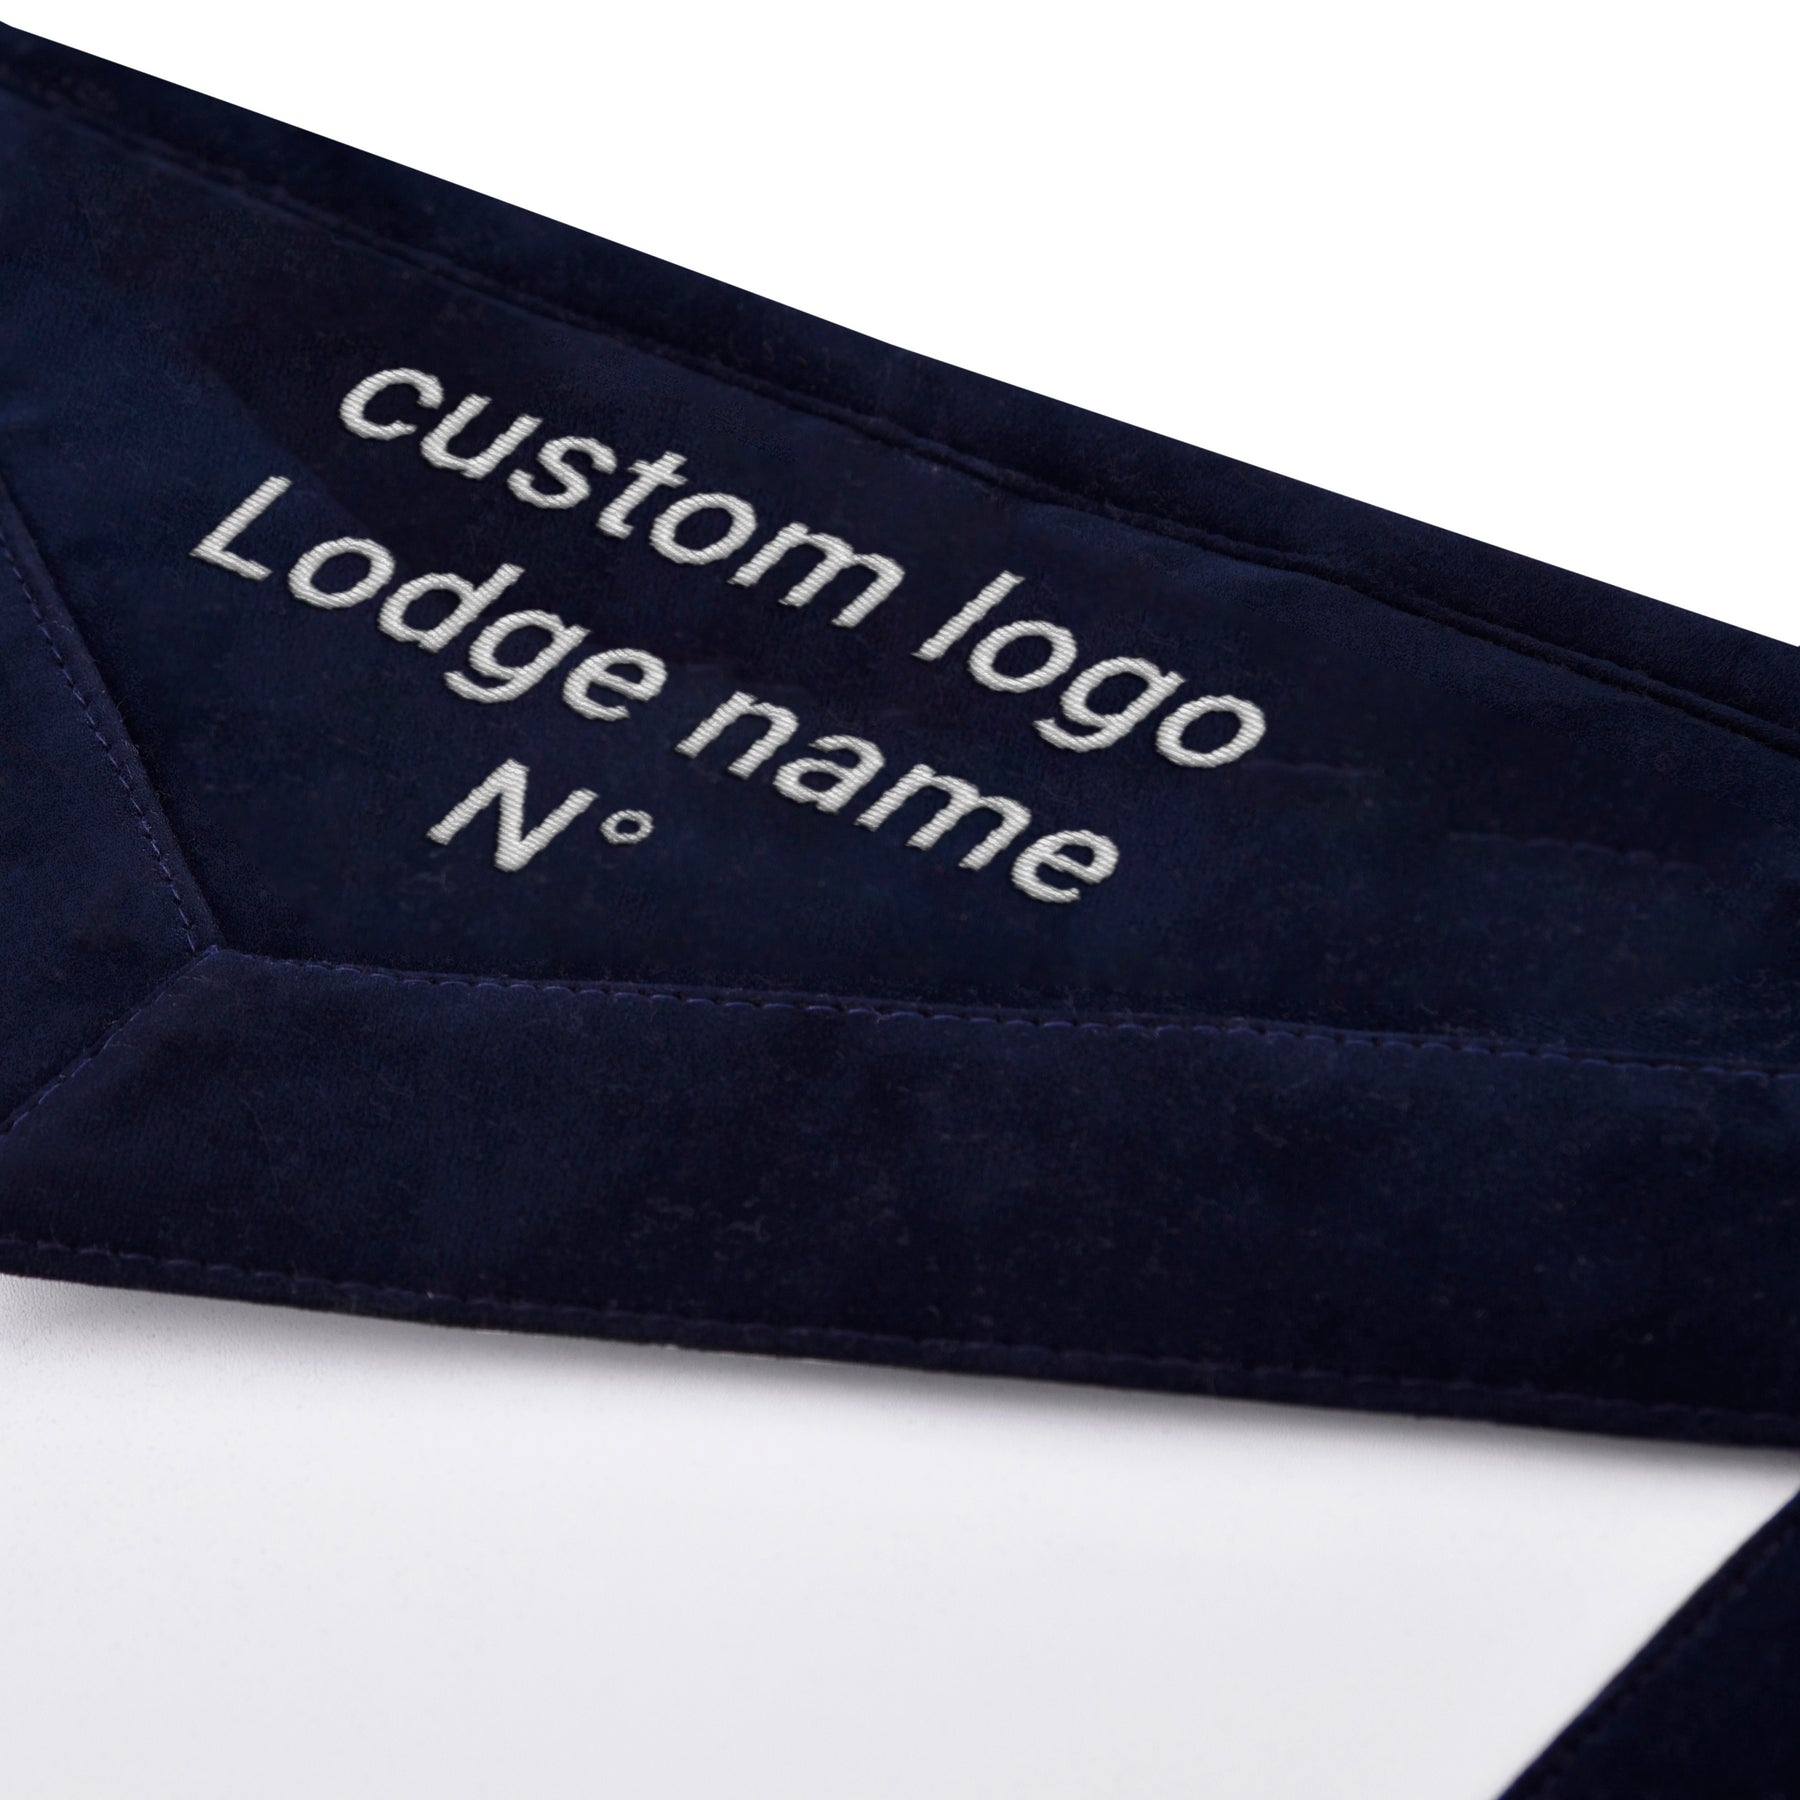 Junior Deacon Blue Lodge Officer Apron - Navy Velvet With Silver Embroidery Thread